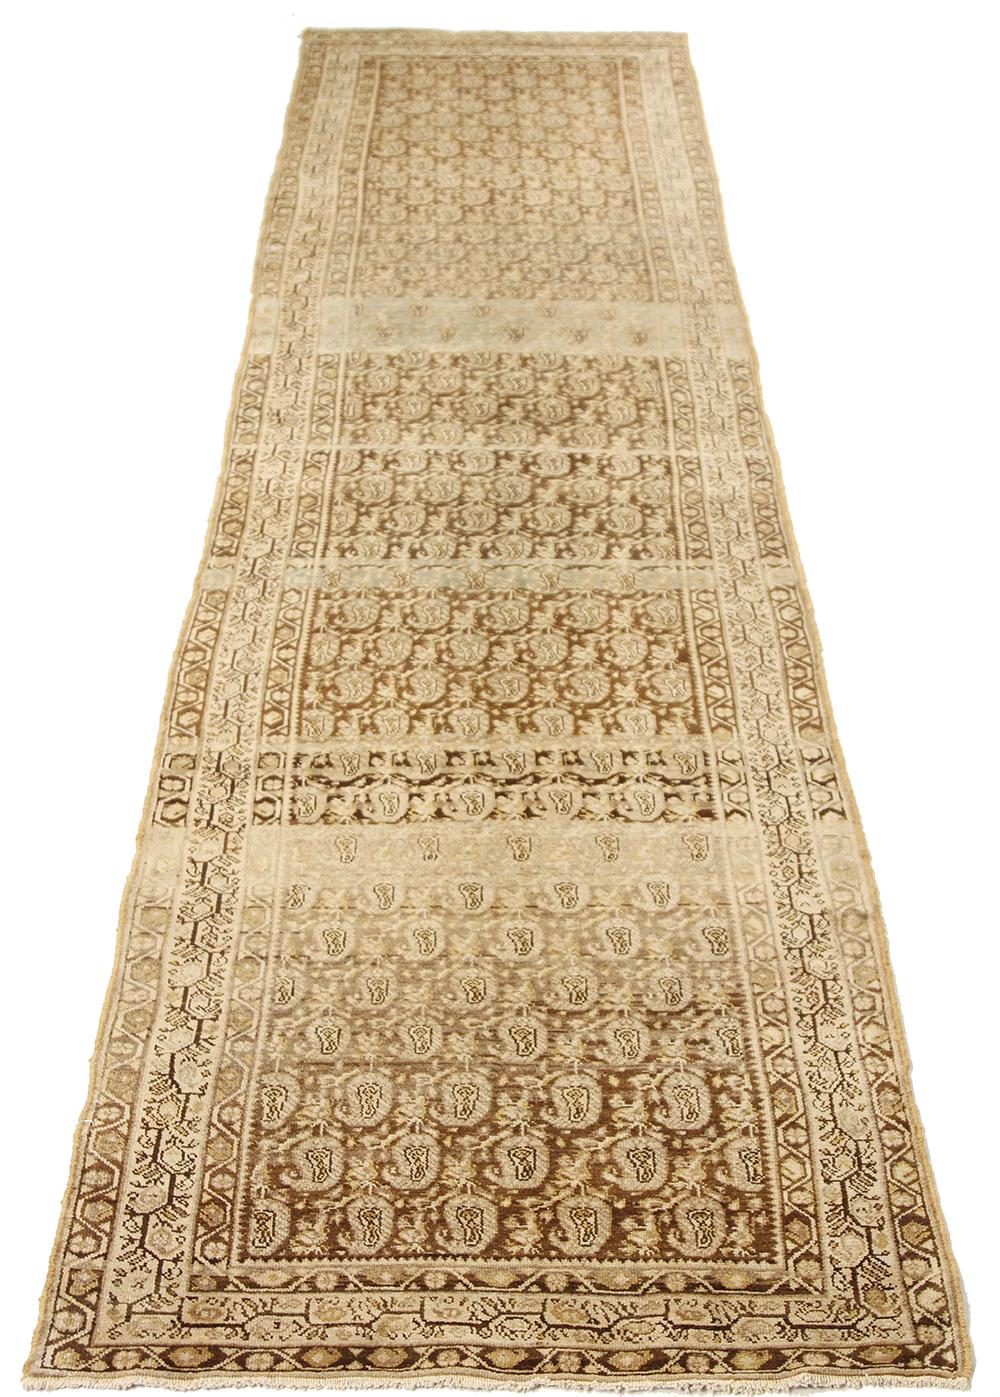 Antique Persian runner rug handwoven from the finest sheep’s wool and colored with all-natural vegetable dyes that are safe for humans and pets. It’s a traditional Koliai design featuring details in ivory and brown. It’s a beautiful piece for